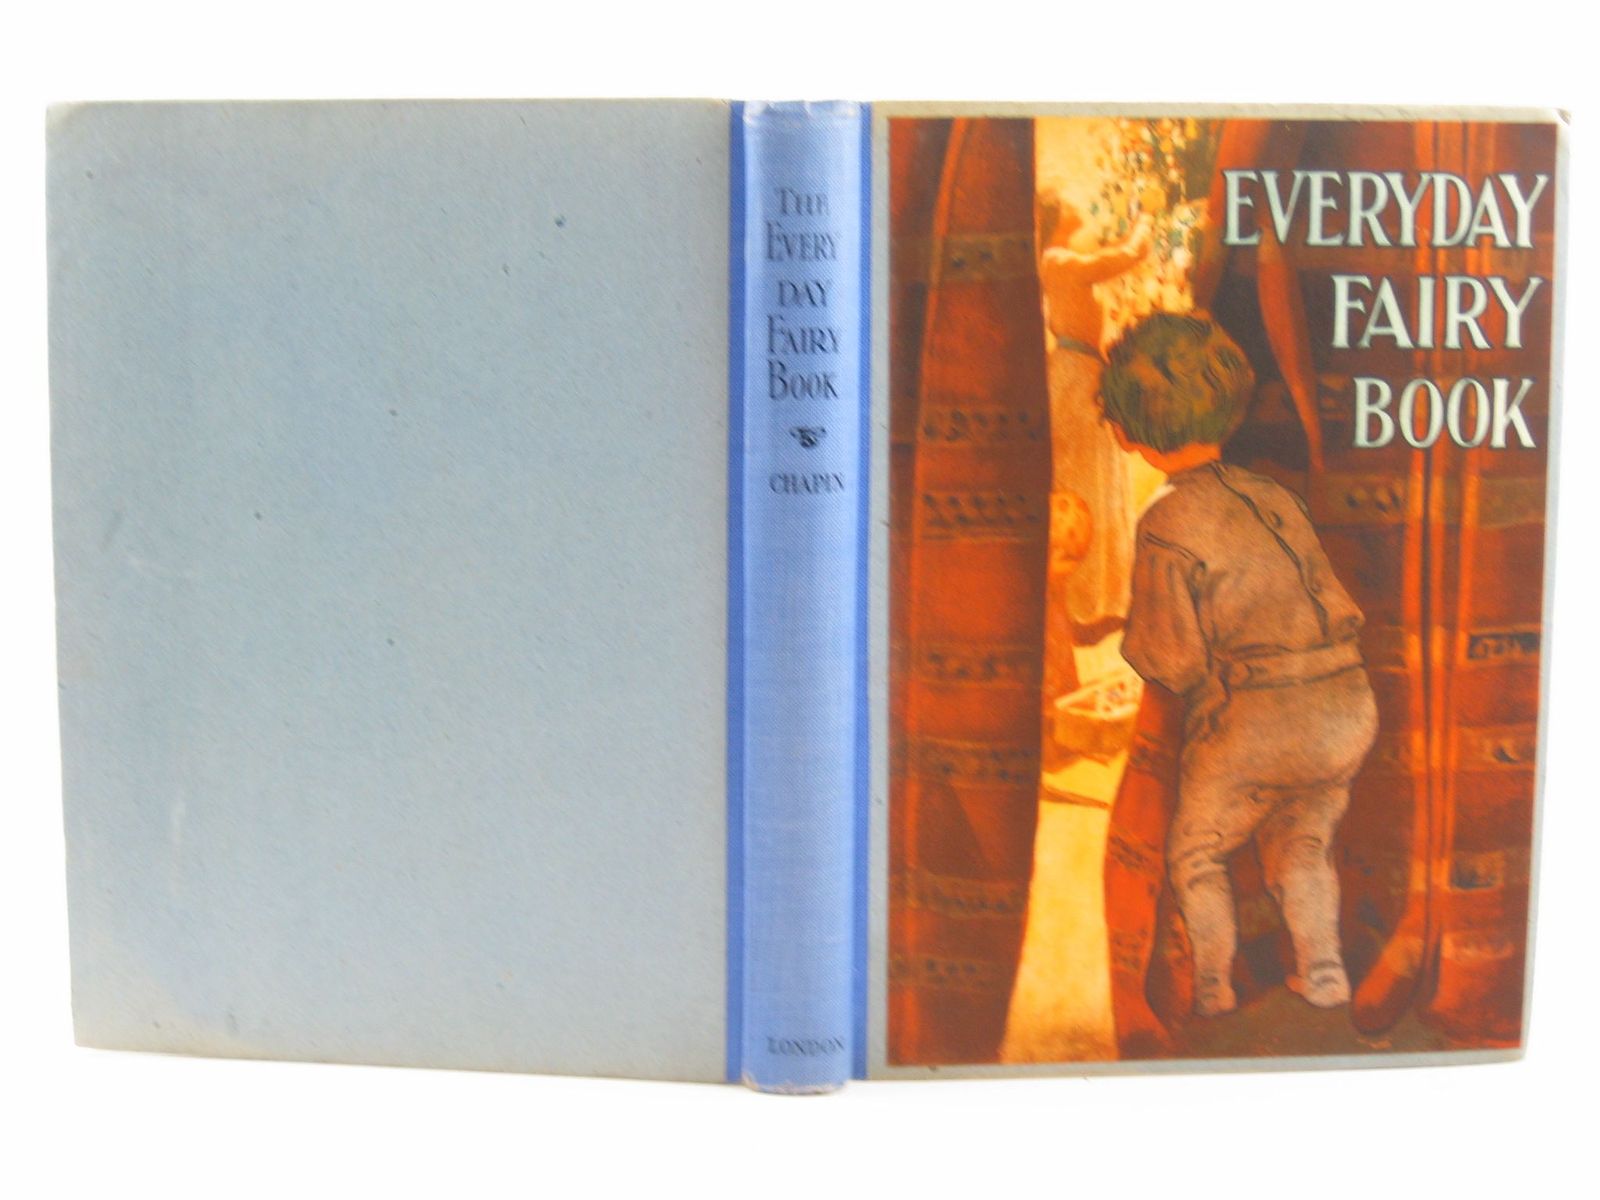 Photo of THE EVERYDAY FAIRY BOOK written by Chapin, Anna Alice illustrated by Smith, Jessie Willcox published by J. Coker & Co. Ltd. (STOCK CODE: 1311333)  for sale by Stella & Rose's Books